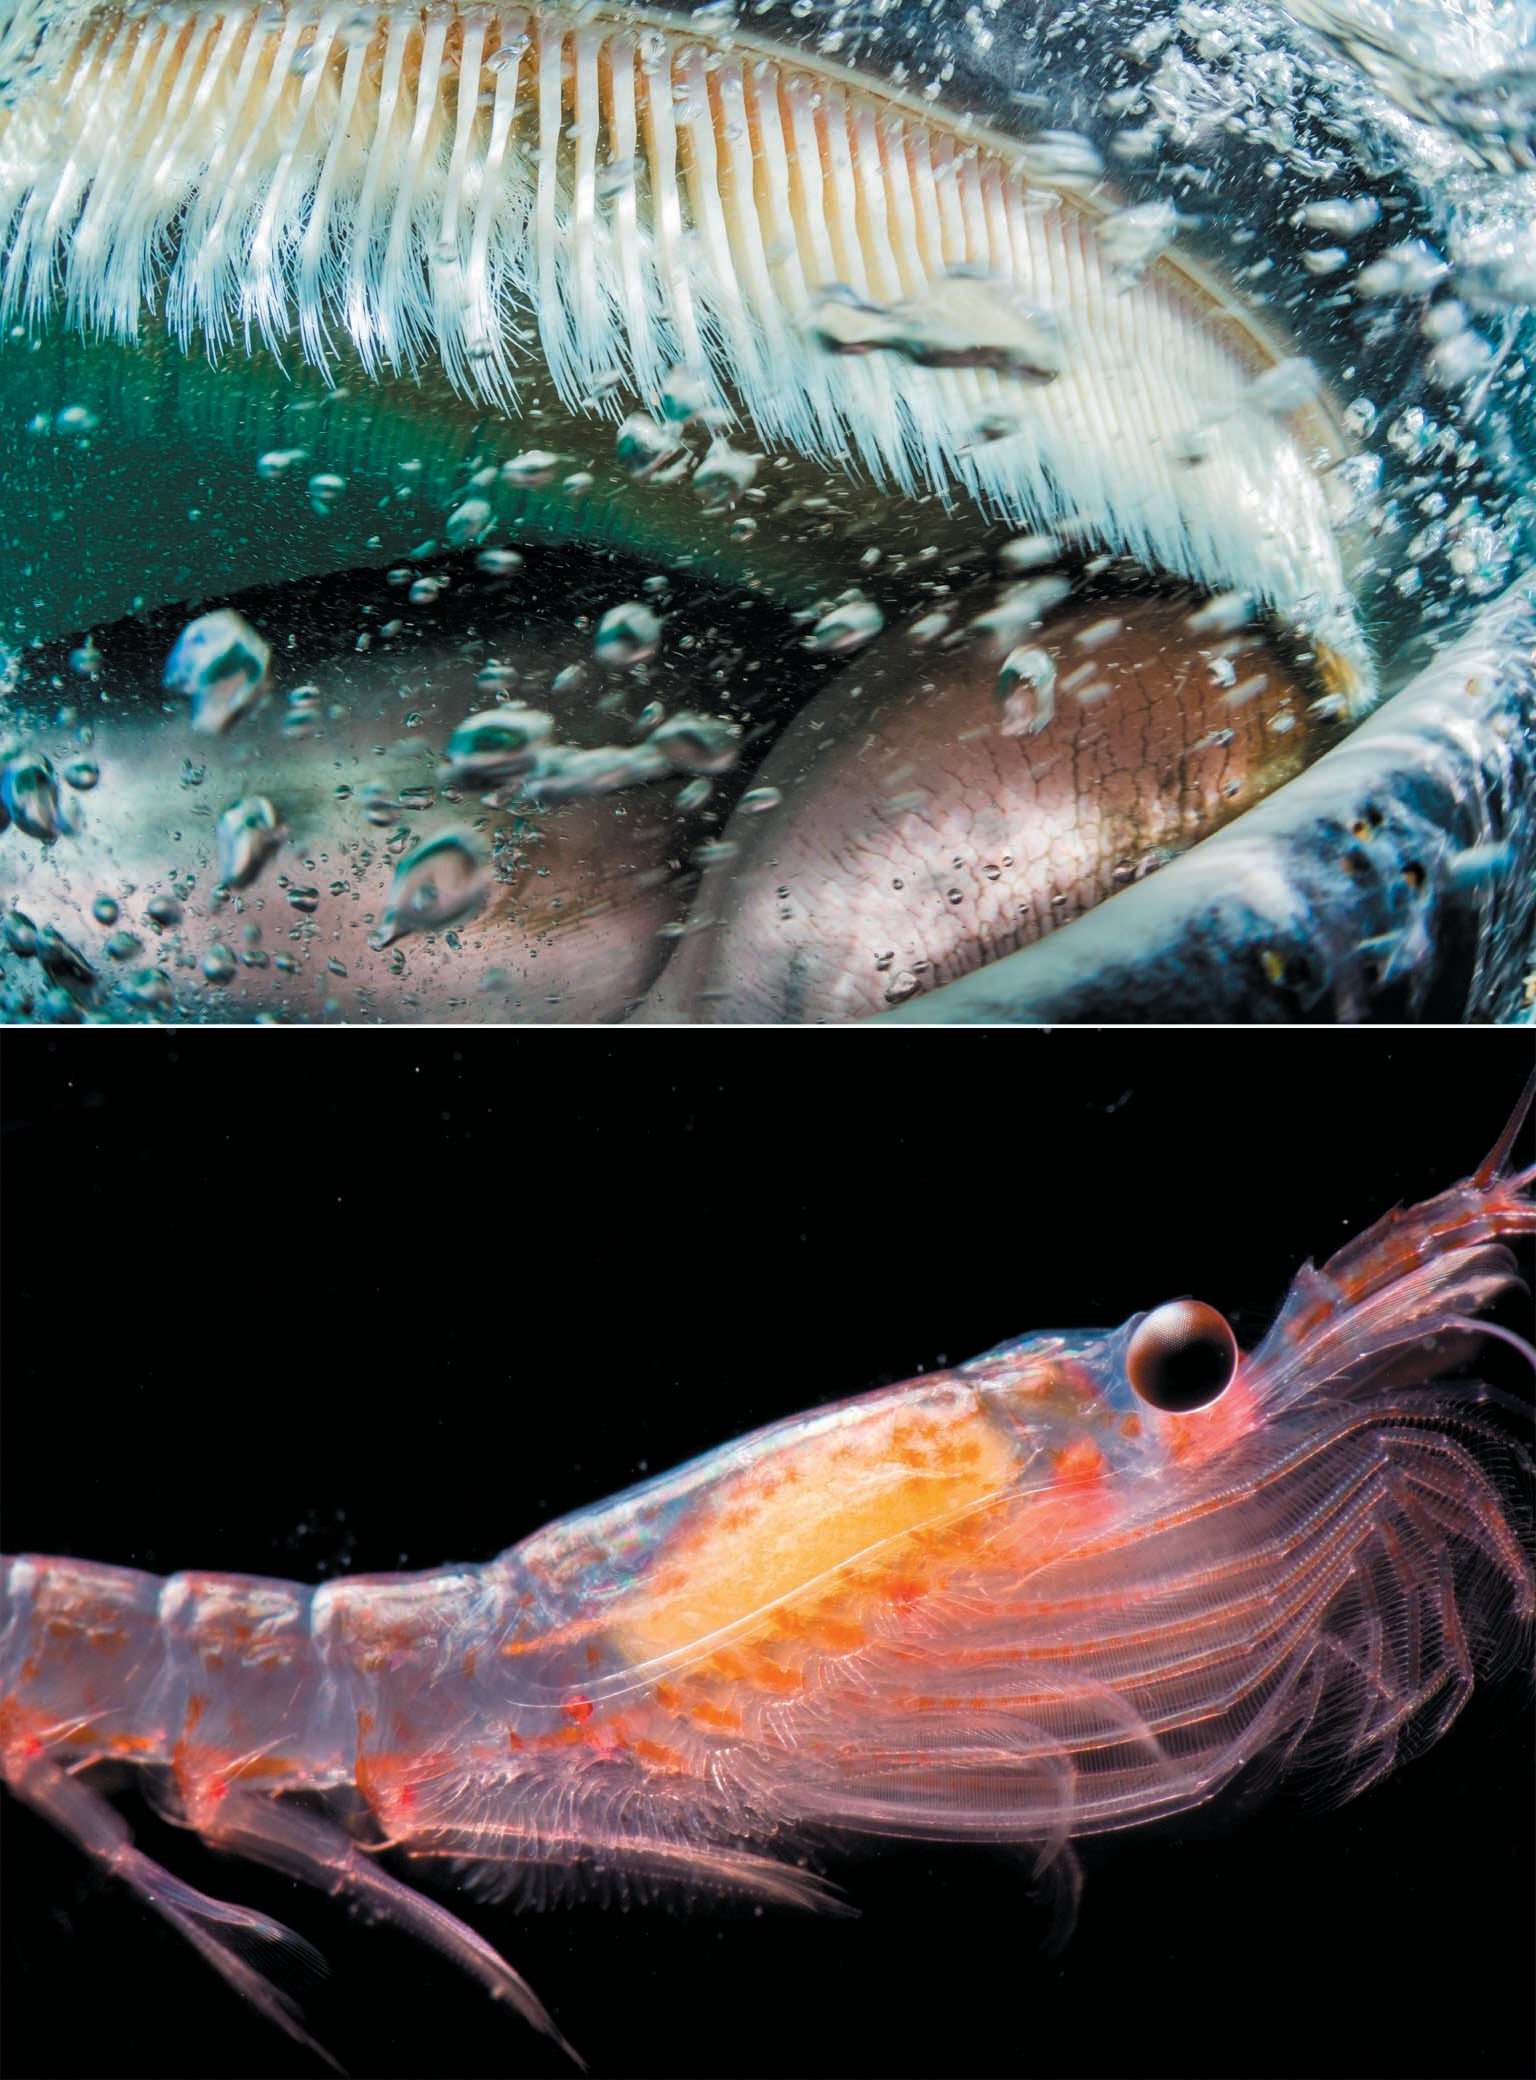 Researchers solve mystery of deep-sea fish with tubular eyes and